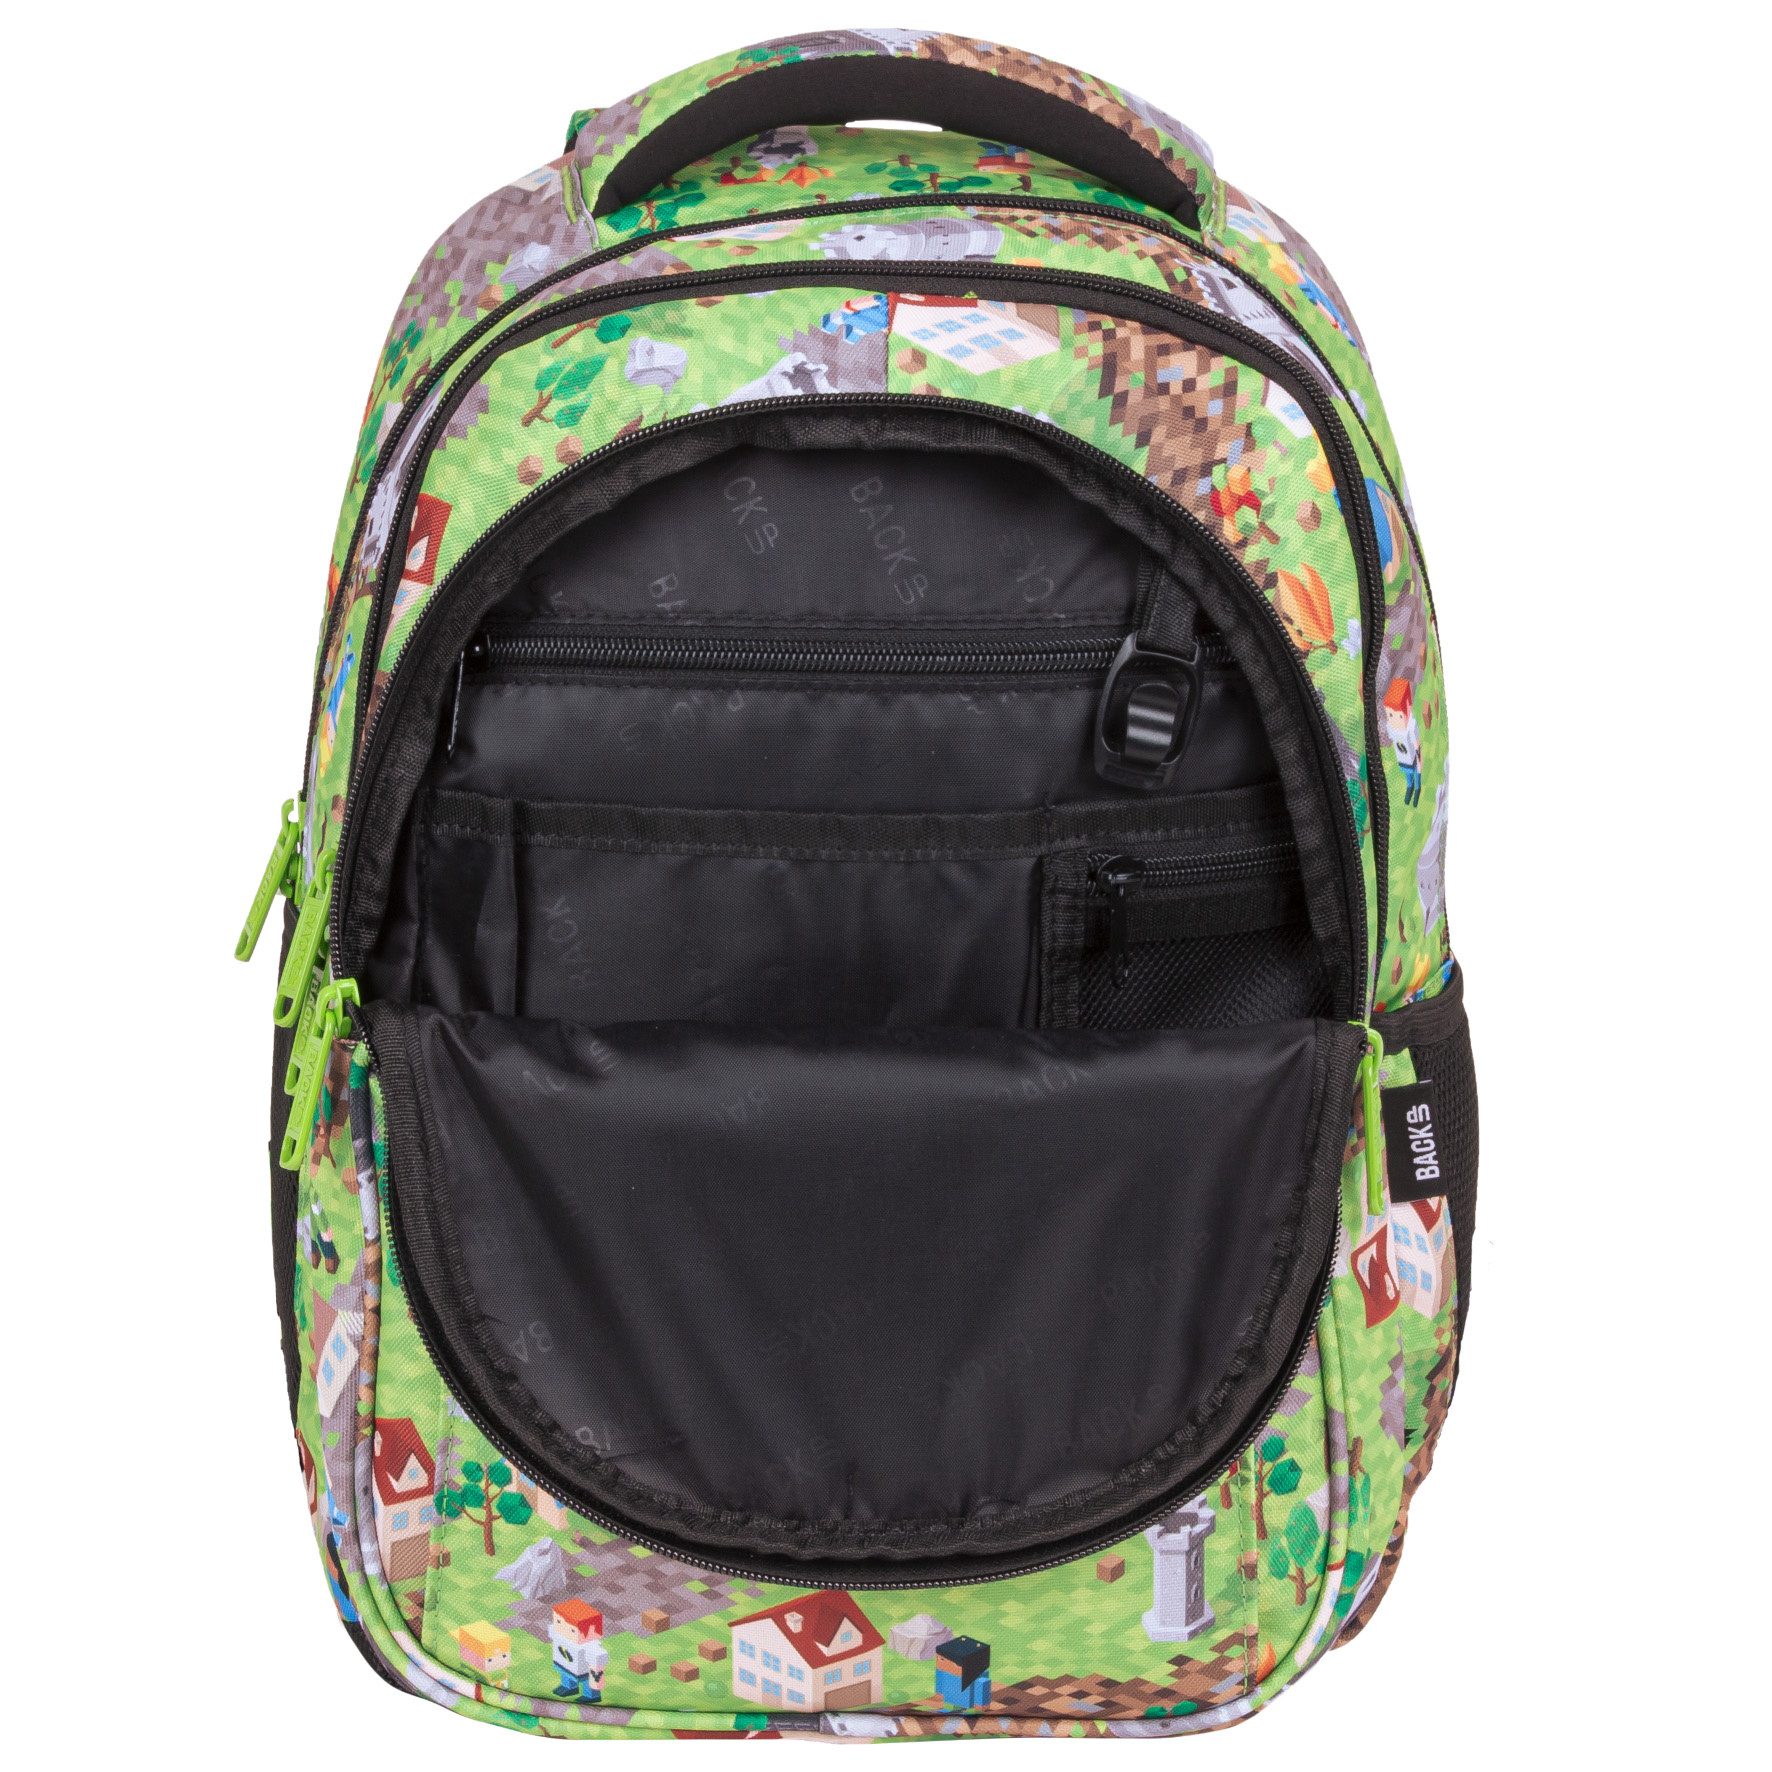 BackUP Backpack Game - 39 x 27 x 20 cm - Polyester